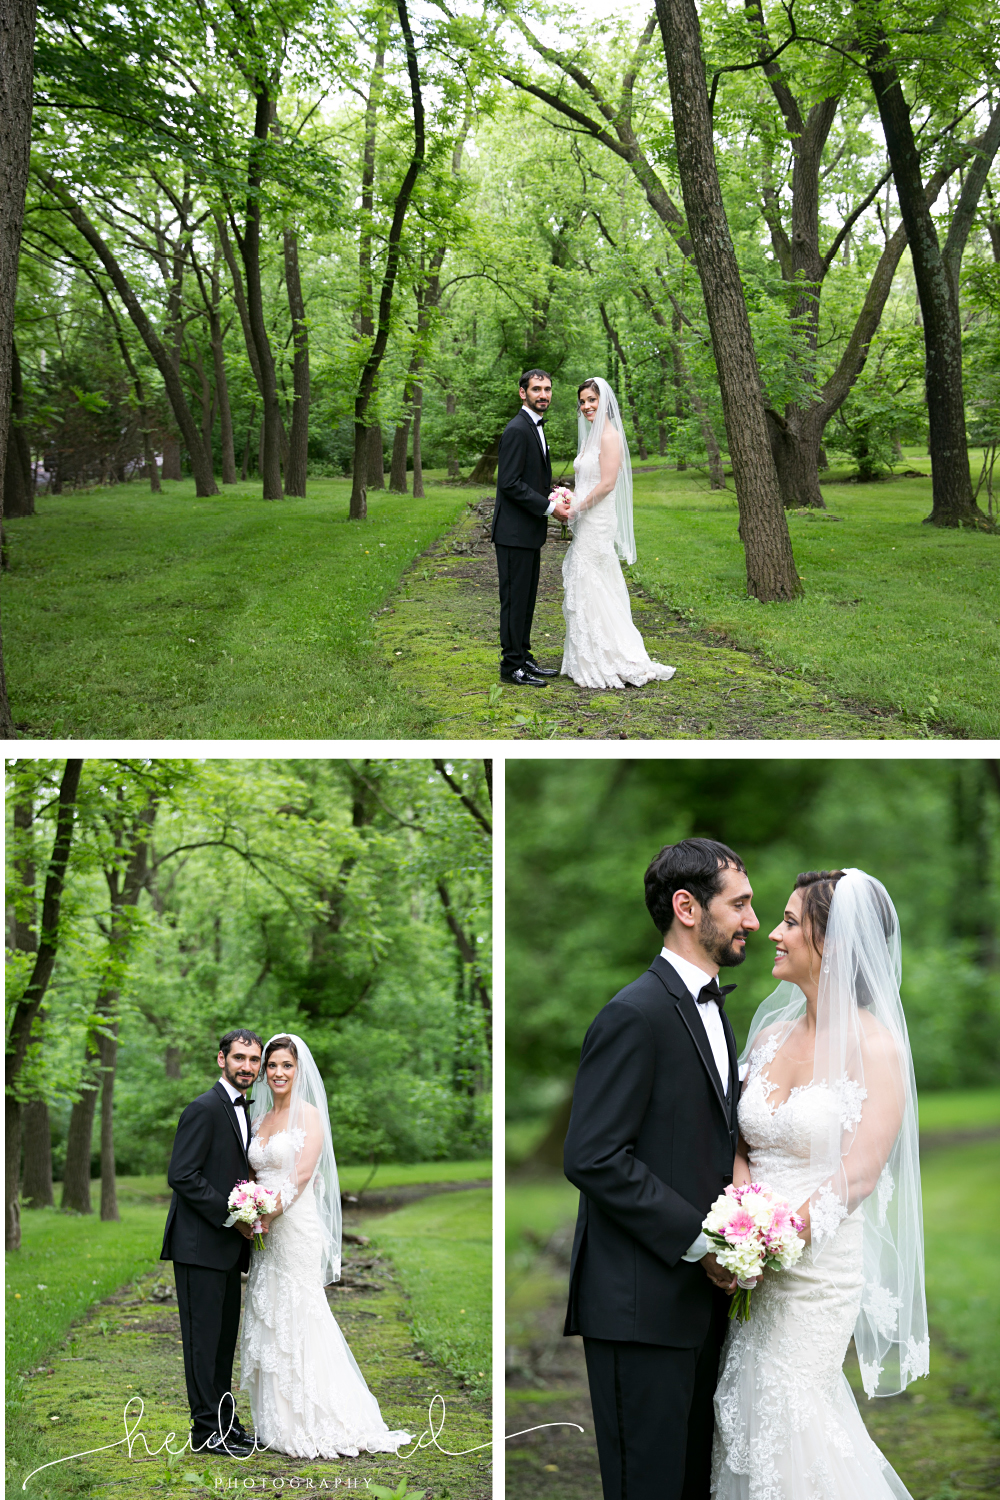  wedding portraits in the woods ay Bridgetown Mill House Country Inn 